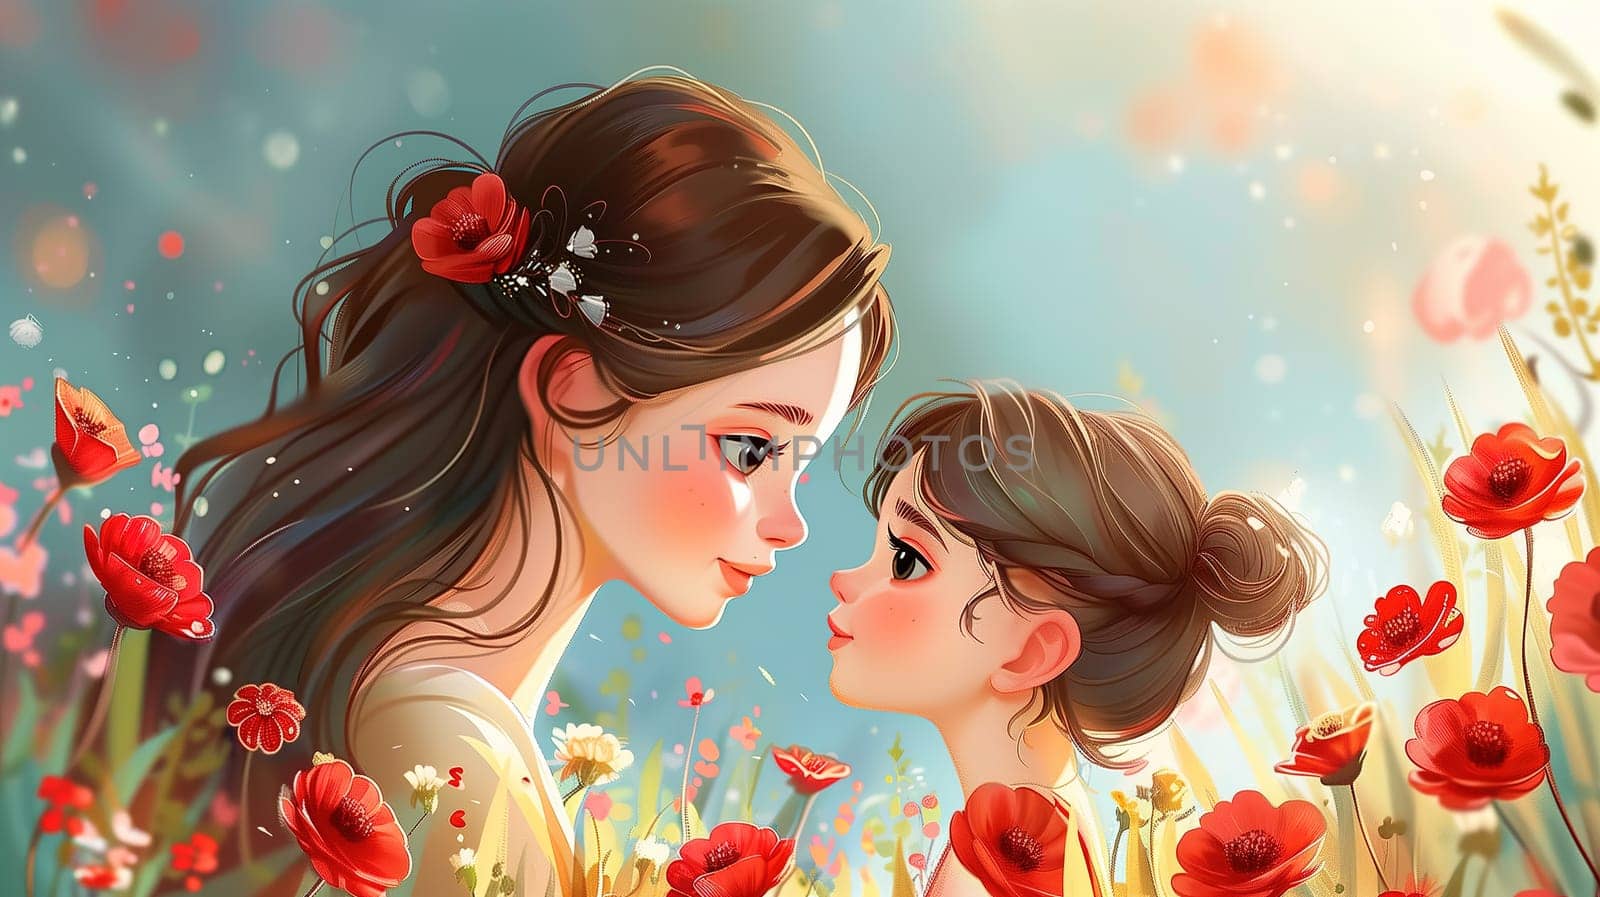 Two Girls in a Field of Flowers by TRMK